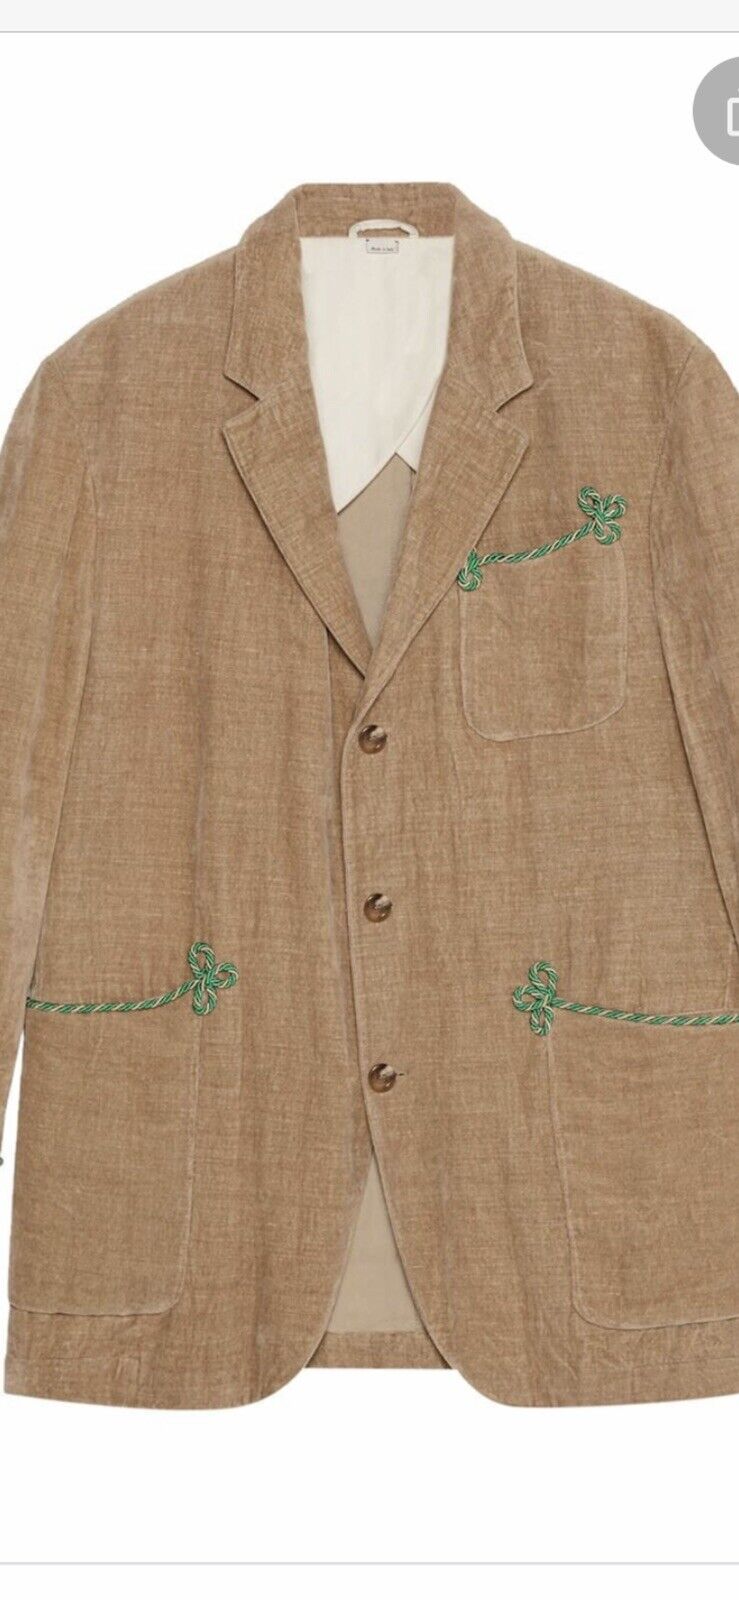 Gucci Mens Neutral Velvet Jacket Embroidery Size 52 Rrp£2410